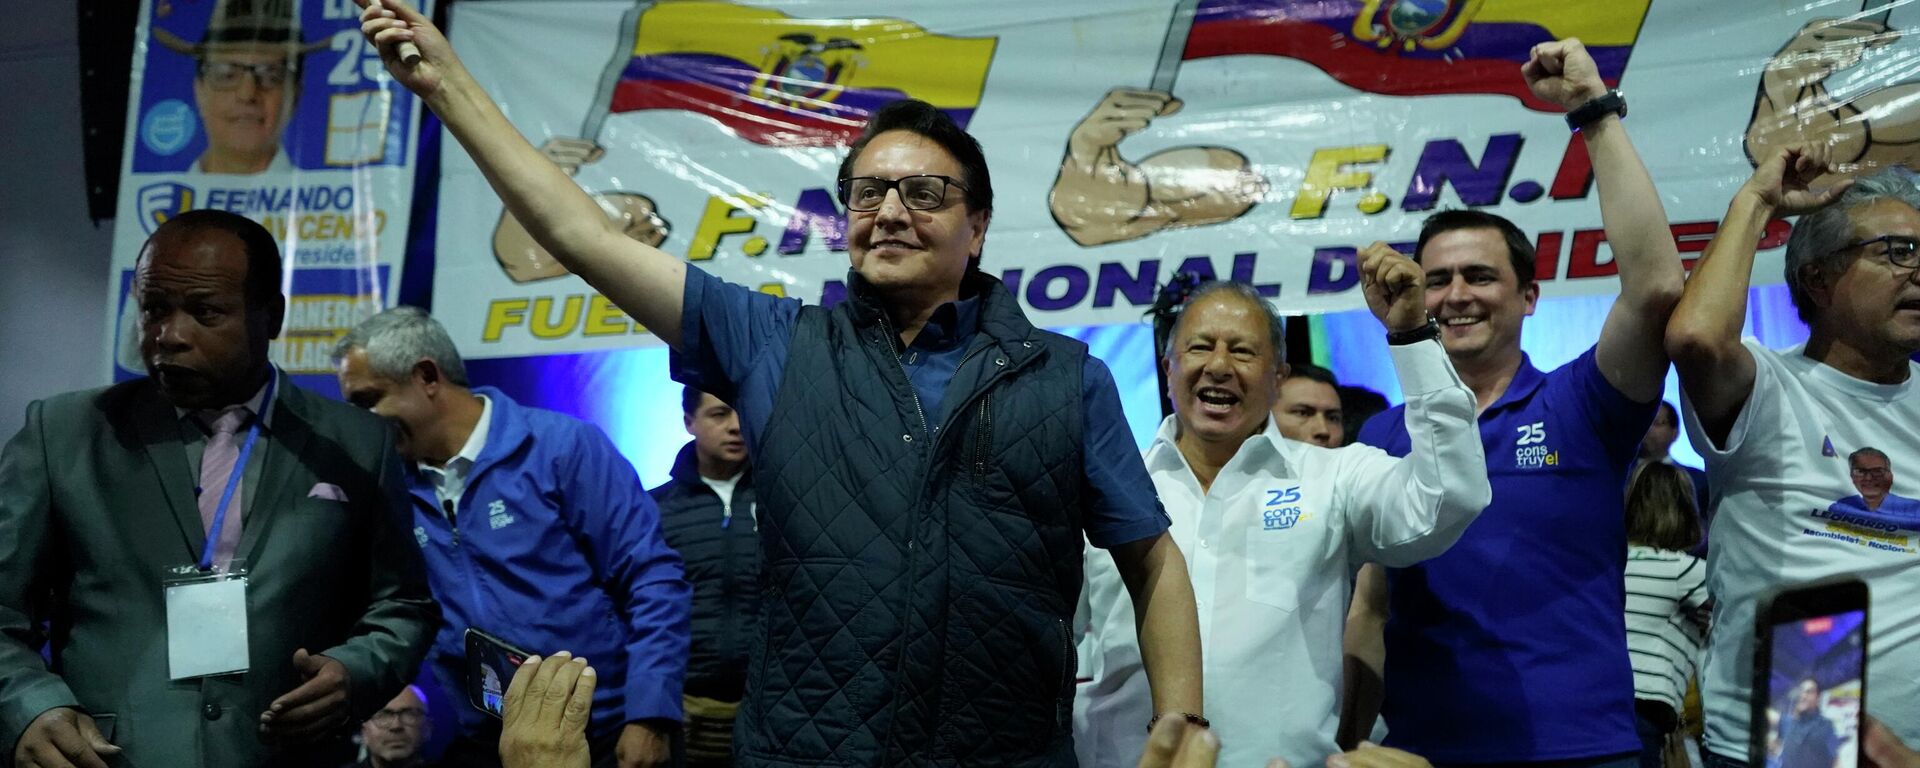 Presidential candidate Fernando Villavicencio during a campaign event minutes before he was shot to death in Quito, Ecuador, Wednesday, Aug. 9, 2023. - Sputnik International, 1920, 10.08.2023